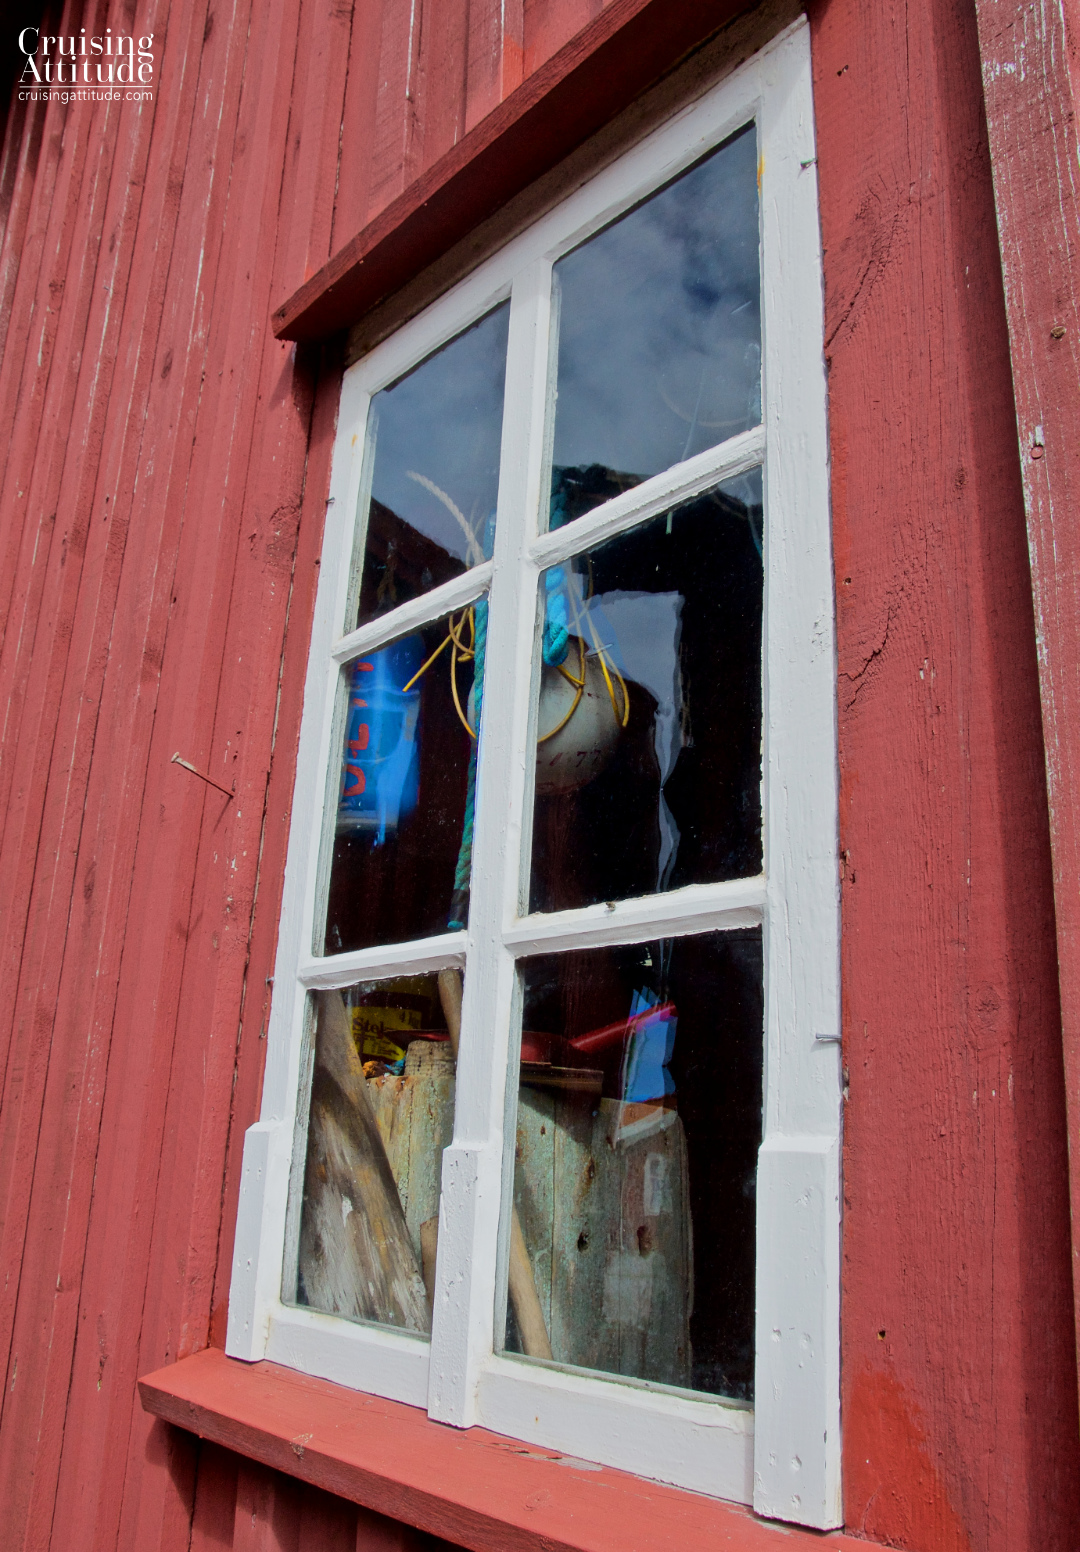 Looking into the window of a fishing cabin. Mollösund, Sweden | Cruising Attitude Sailing Blog - Discovery 55 